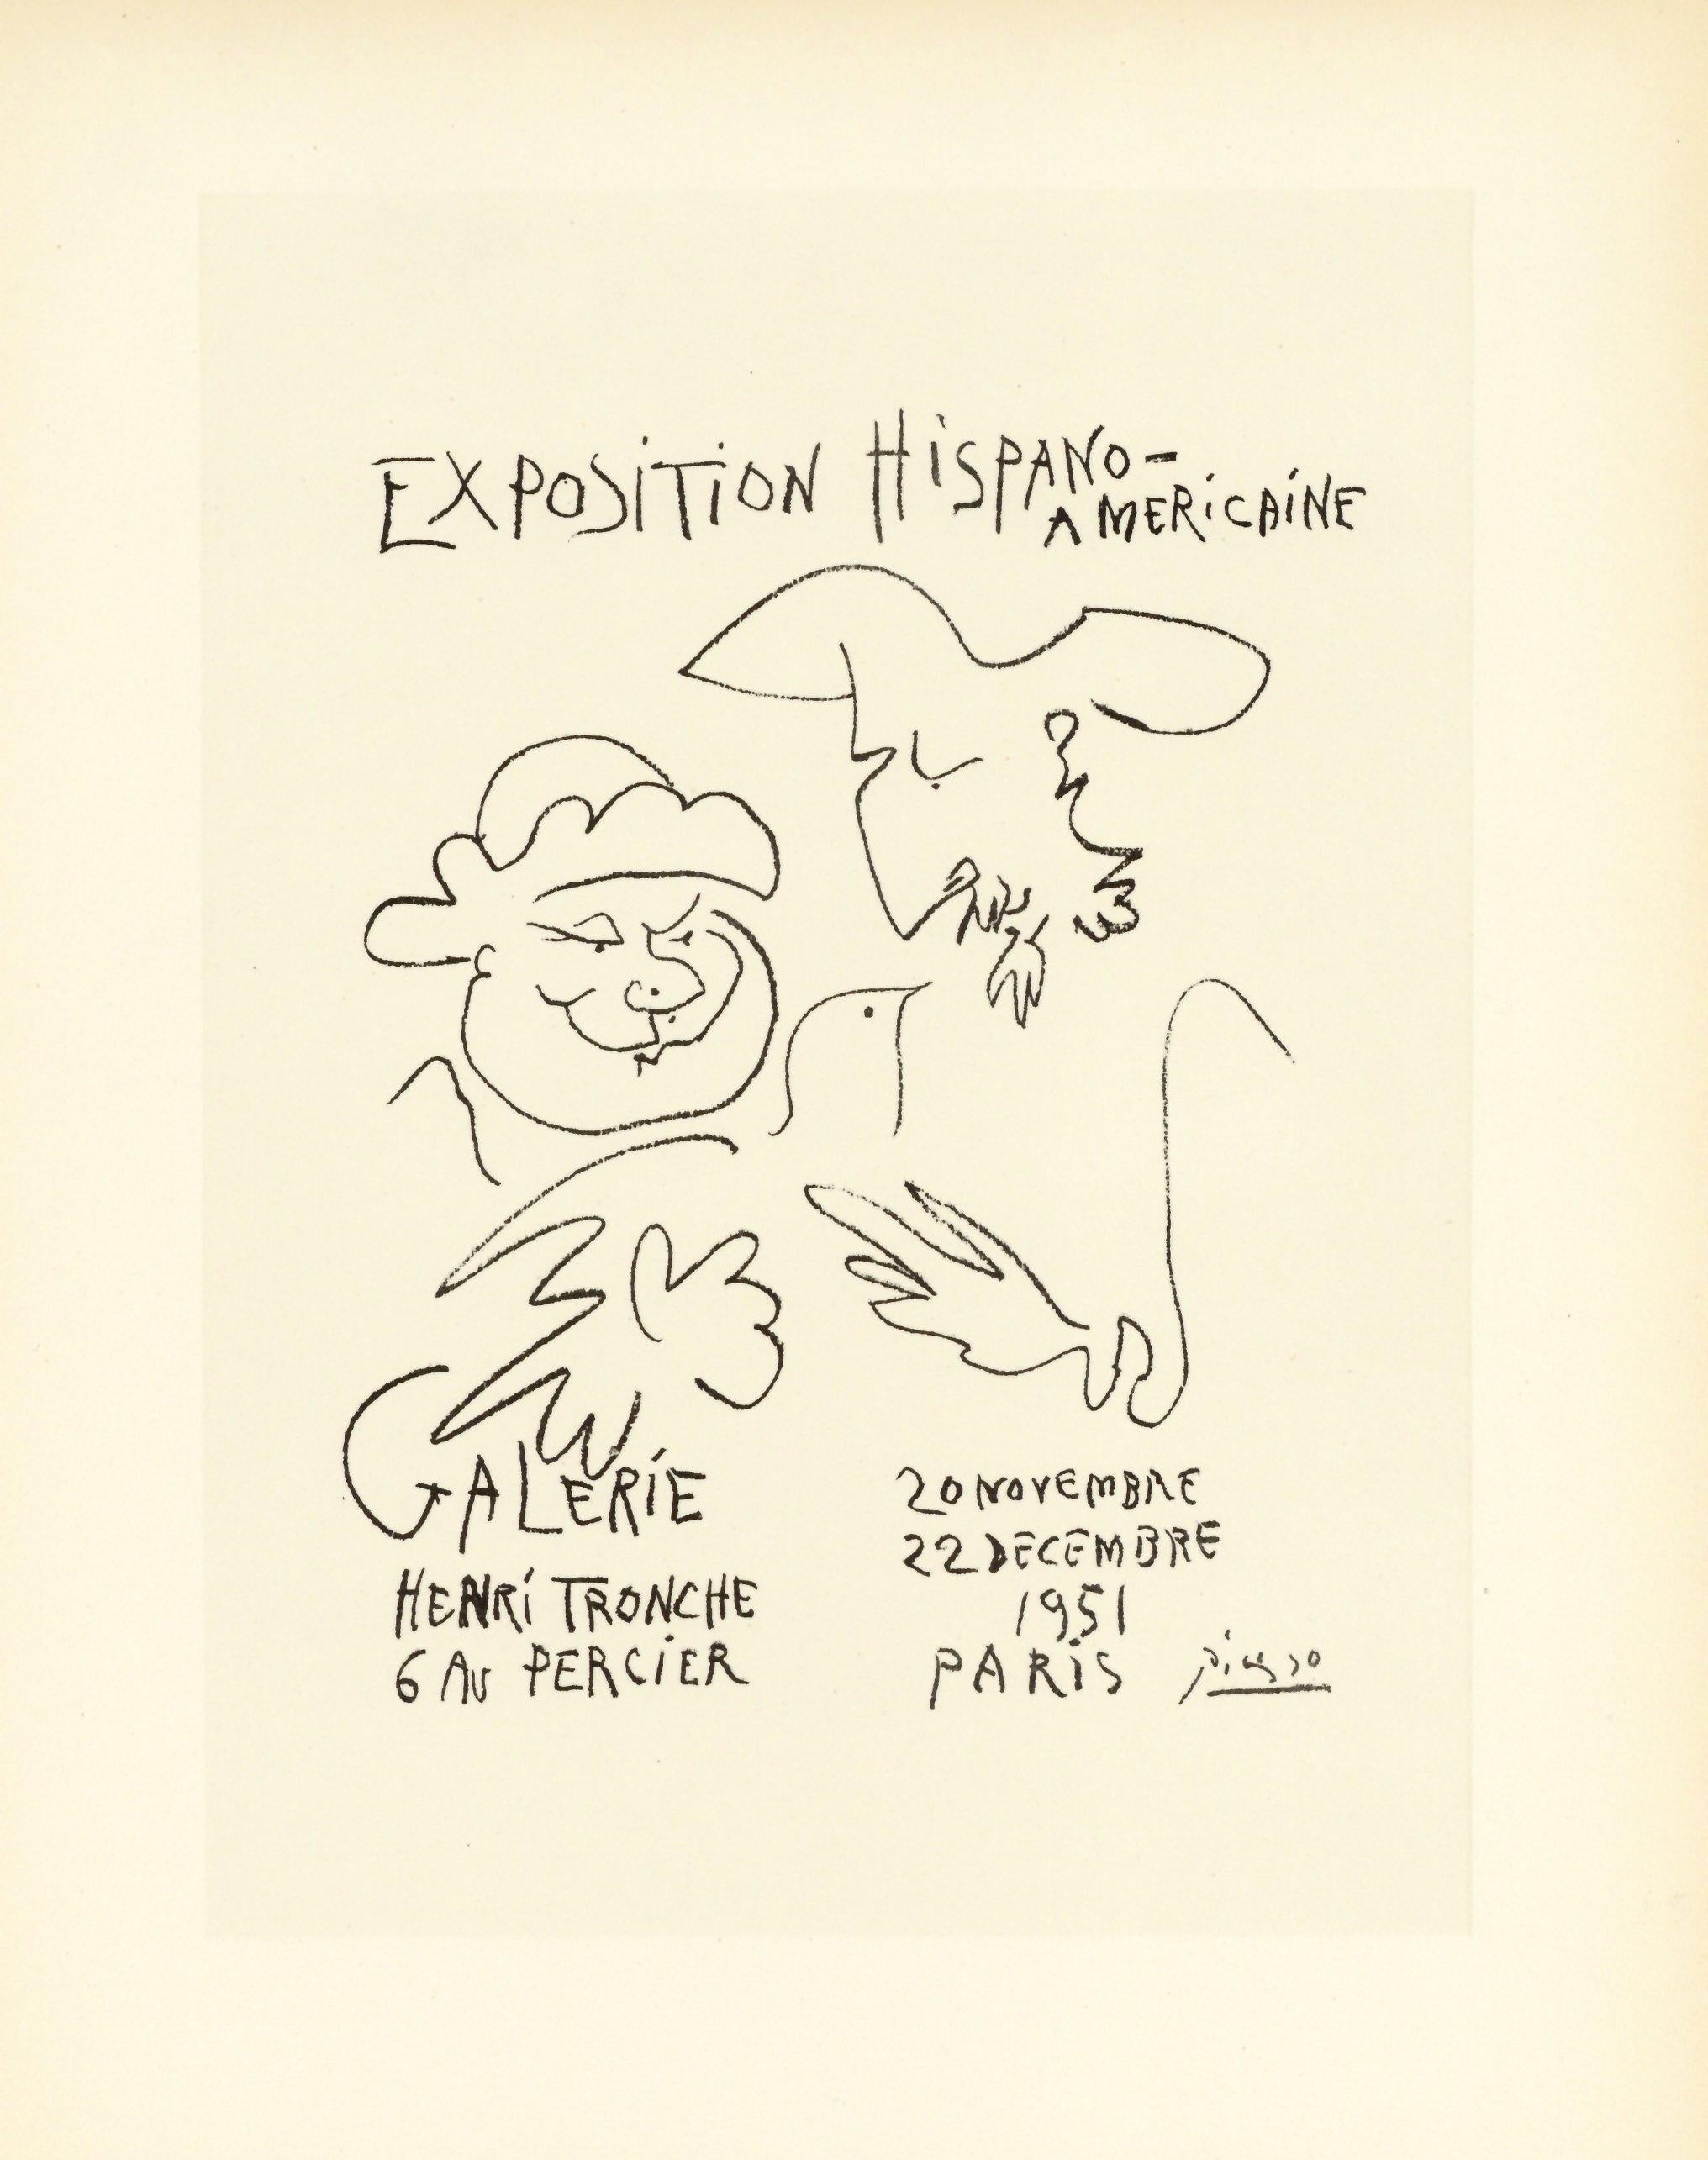 "Exposition Hispano-Americaine" lithograph poster - Print by (after) Pablo Picasso